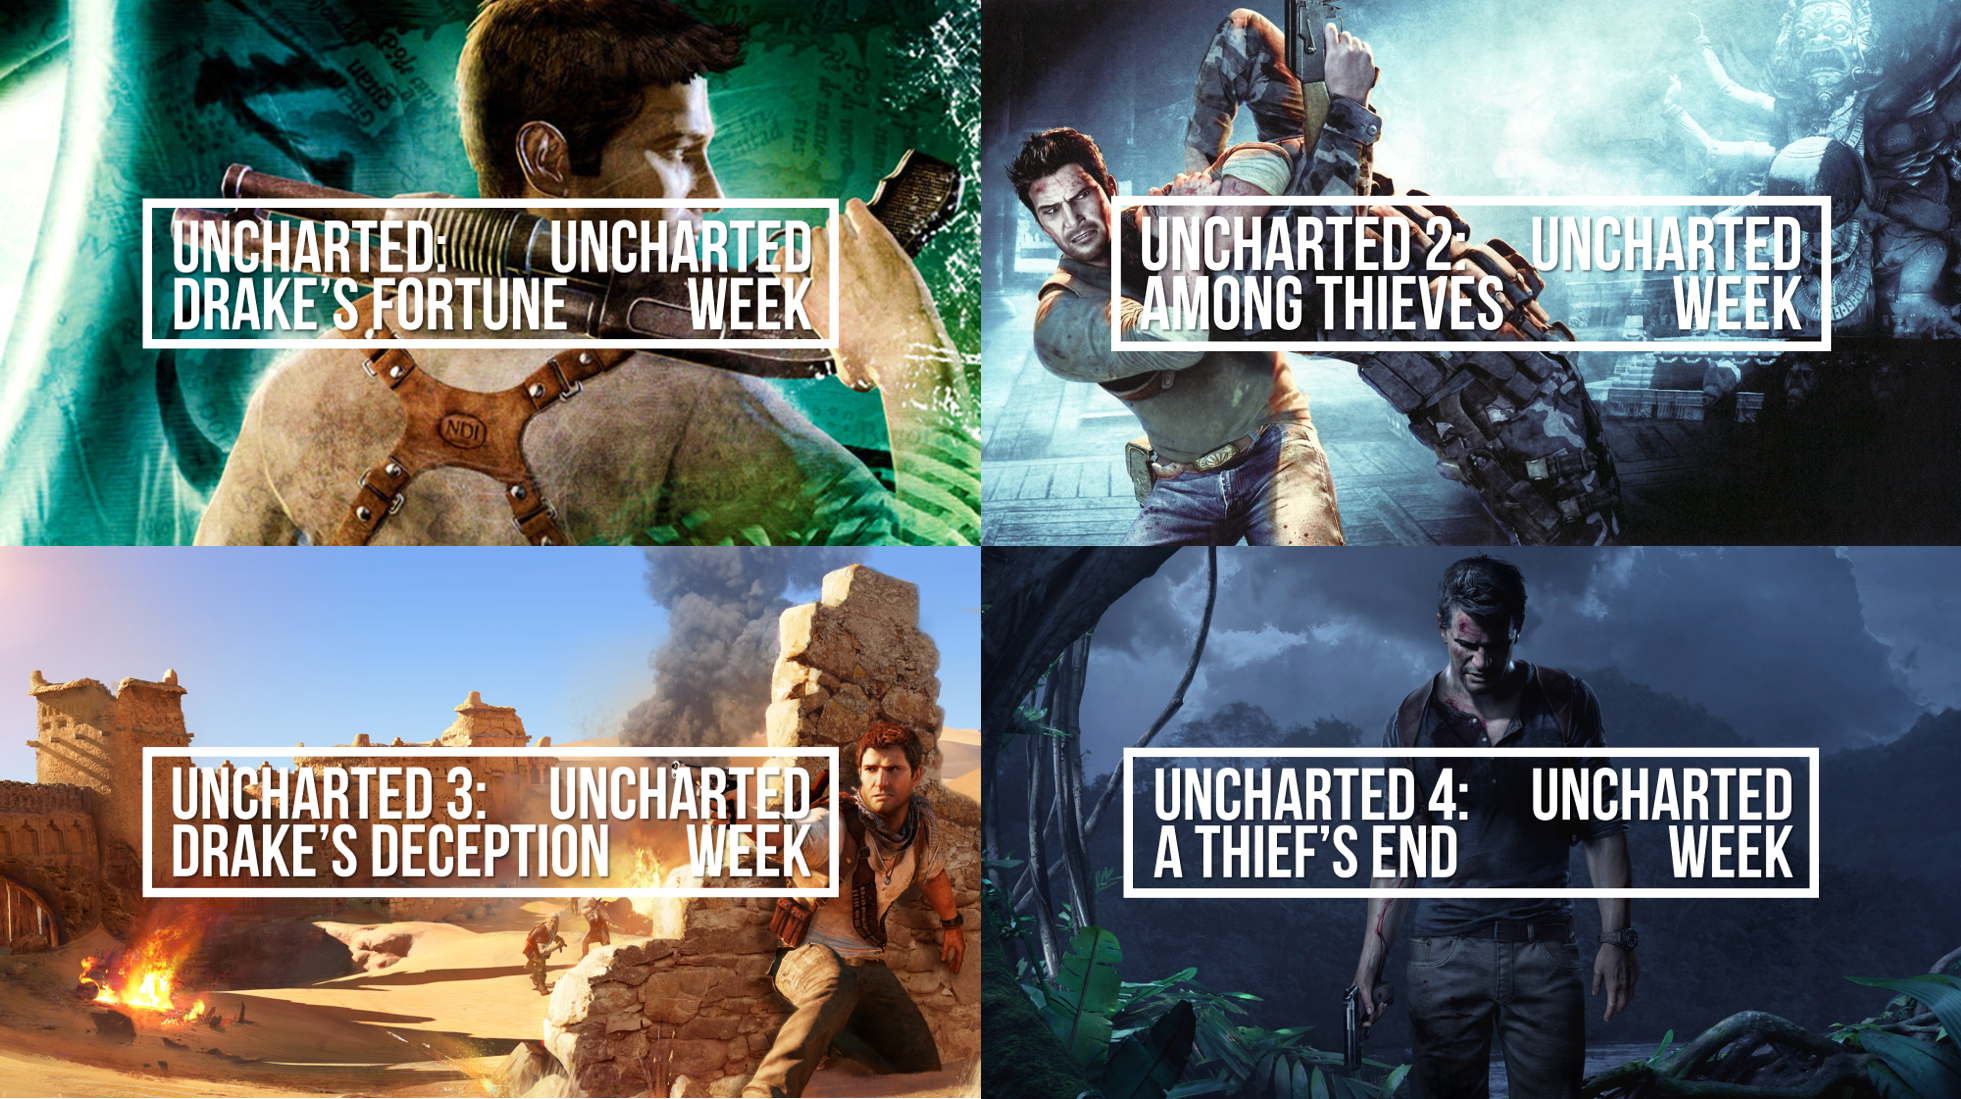 Uncharted 2 Multiplayer Offering 5x XP Today, Exclusive Drake Skin